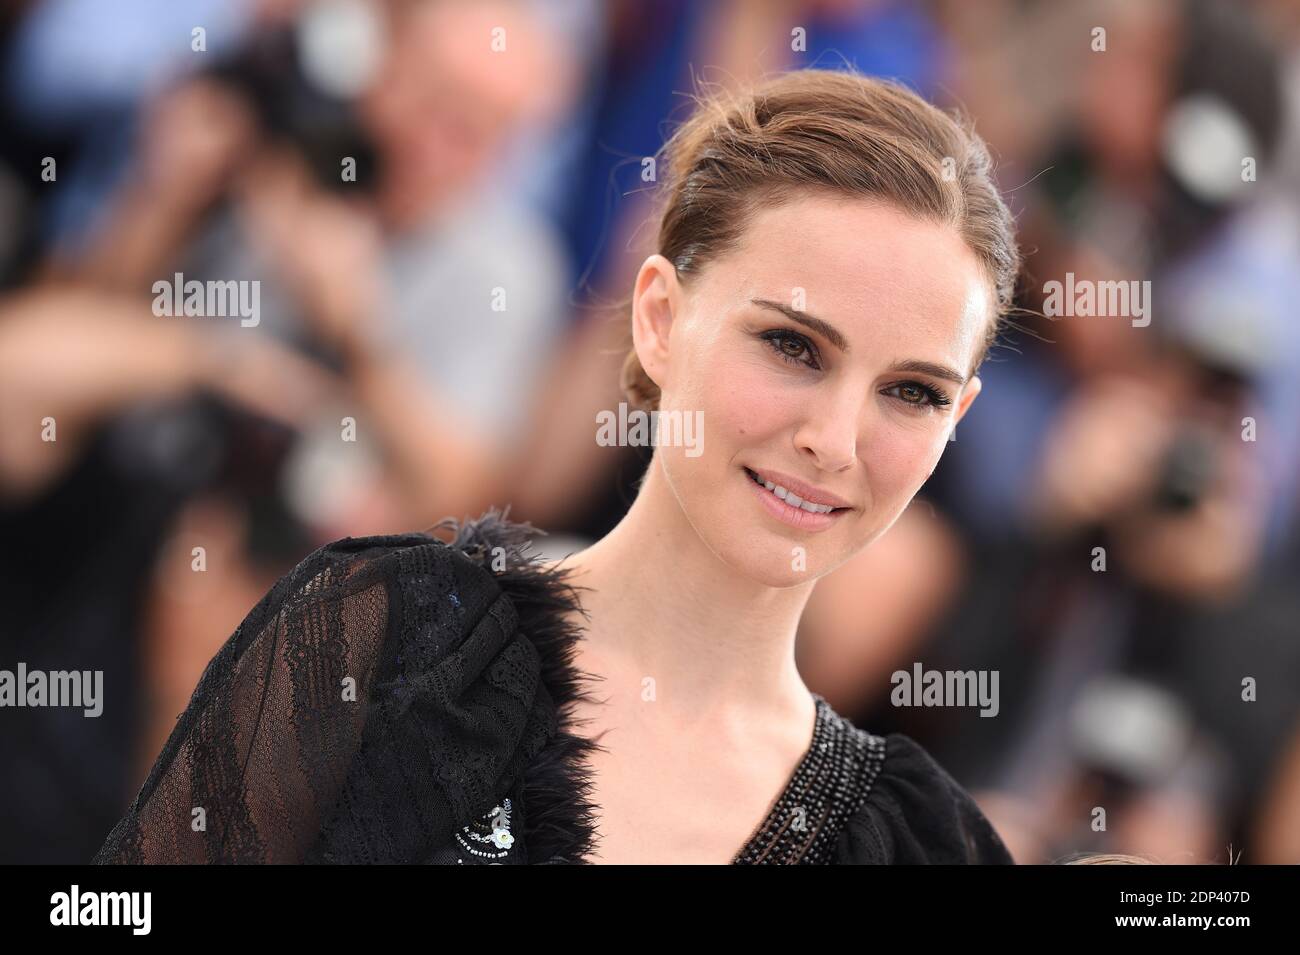 Natalie Portman attends 'A Tale of Love and Darkness' photocall at the 68th Cannes Film Festival on May 17th, 2015 in Cannes, France. Photo by Lionel Hahn/ABACAPRESS.COM Stock Photo